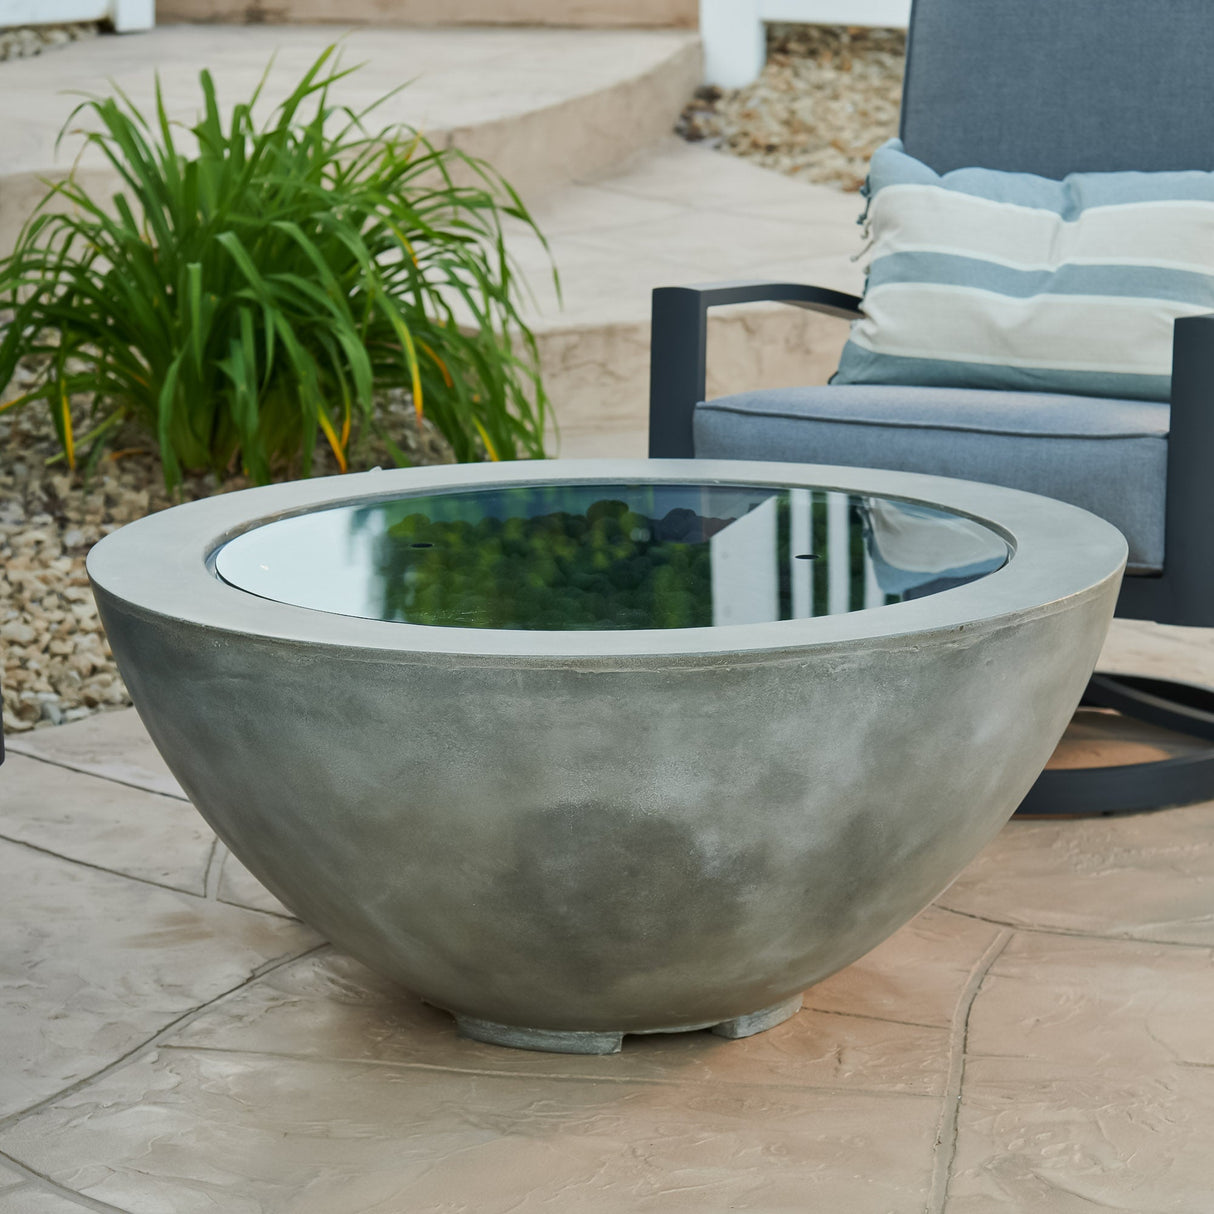 A cover placed on the Natural Grey Cove Round Gas Fire Pit Bowl 42" so it can be used as an outdoor table